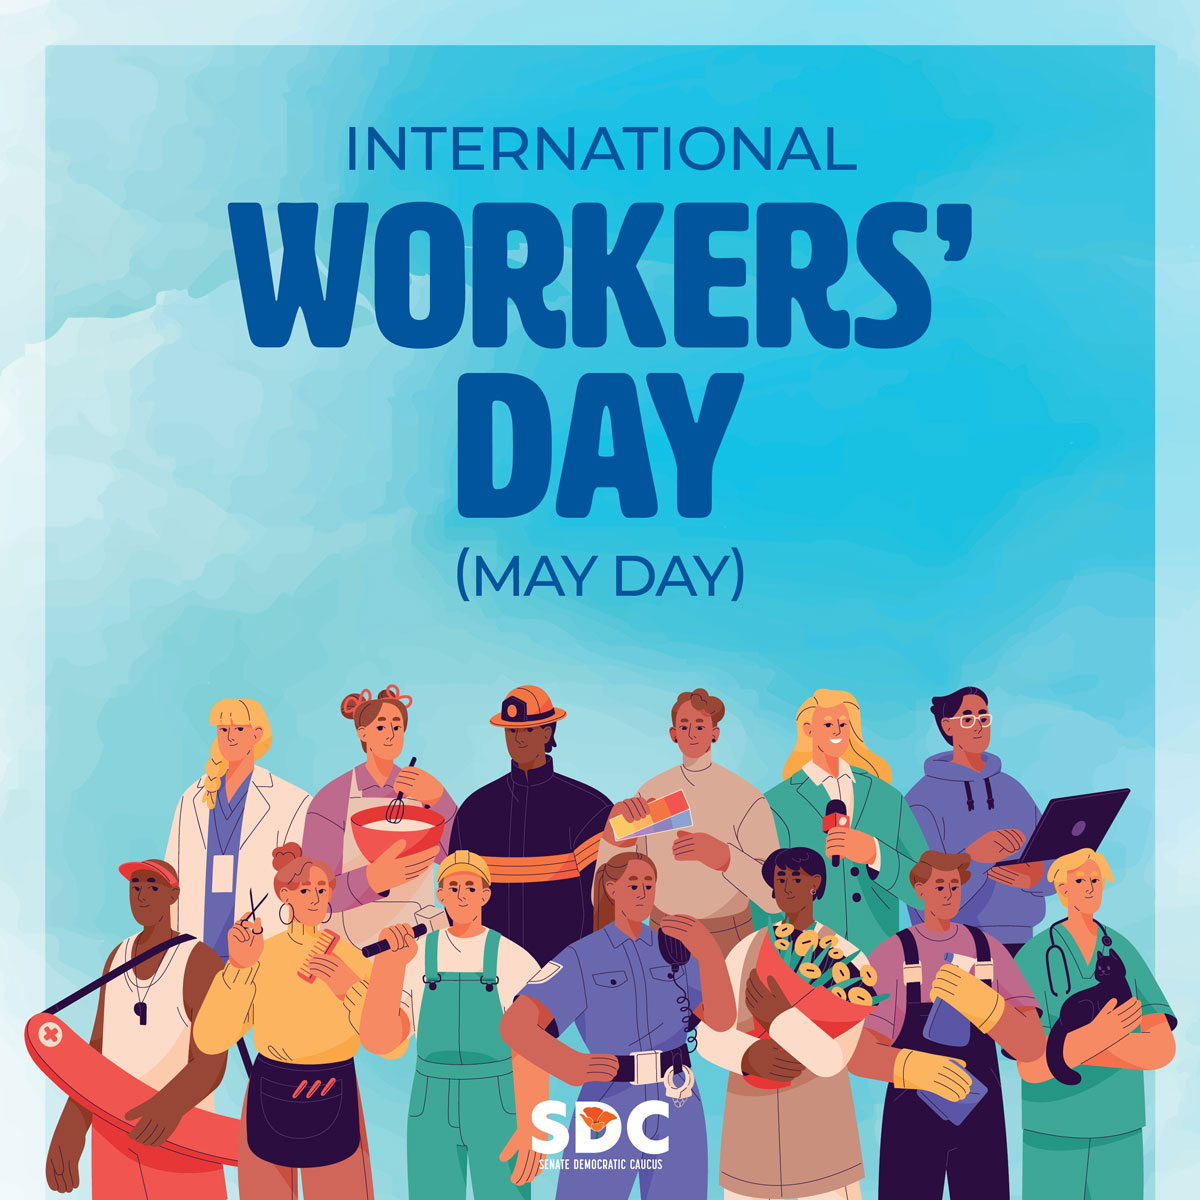 May Day - also known as International Workers' Day - is a global celebration of the working class. Happy May Day! #CASenateDems #LaborDay